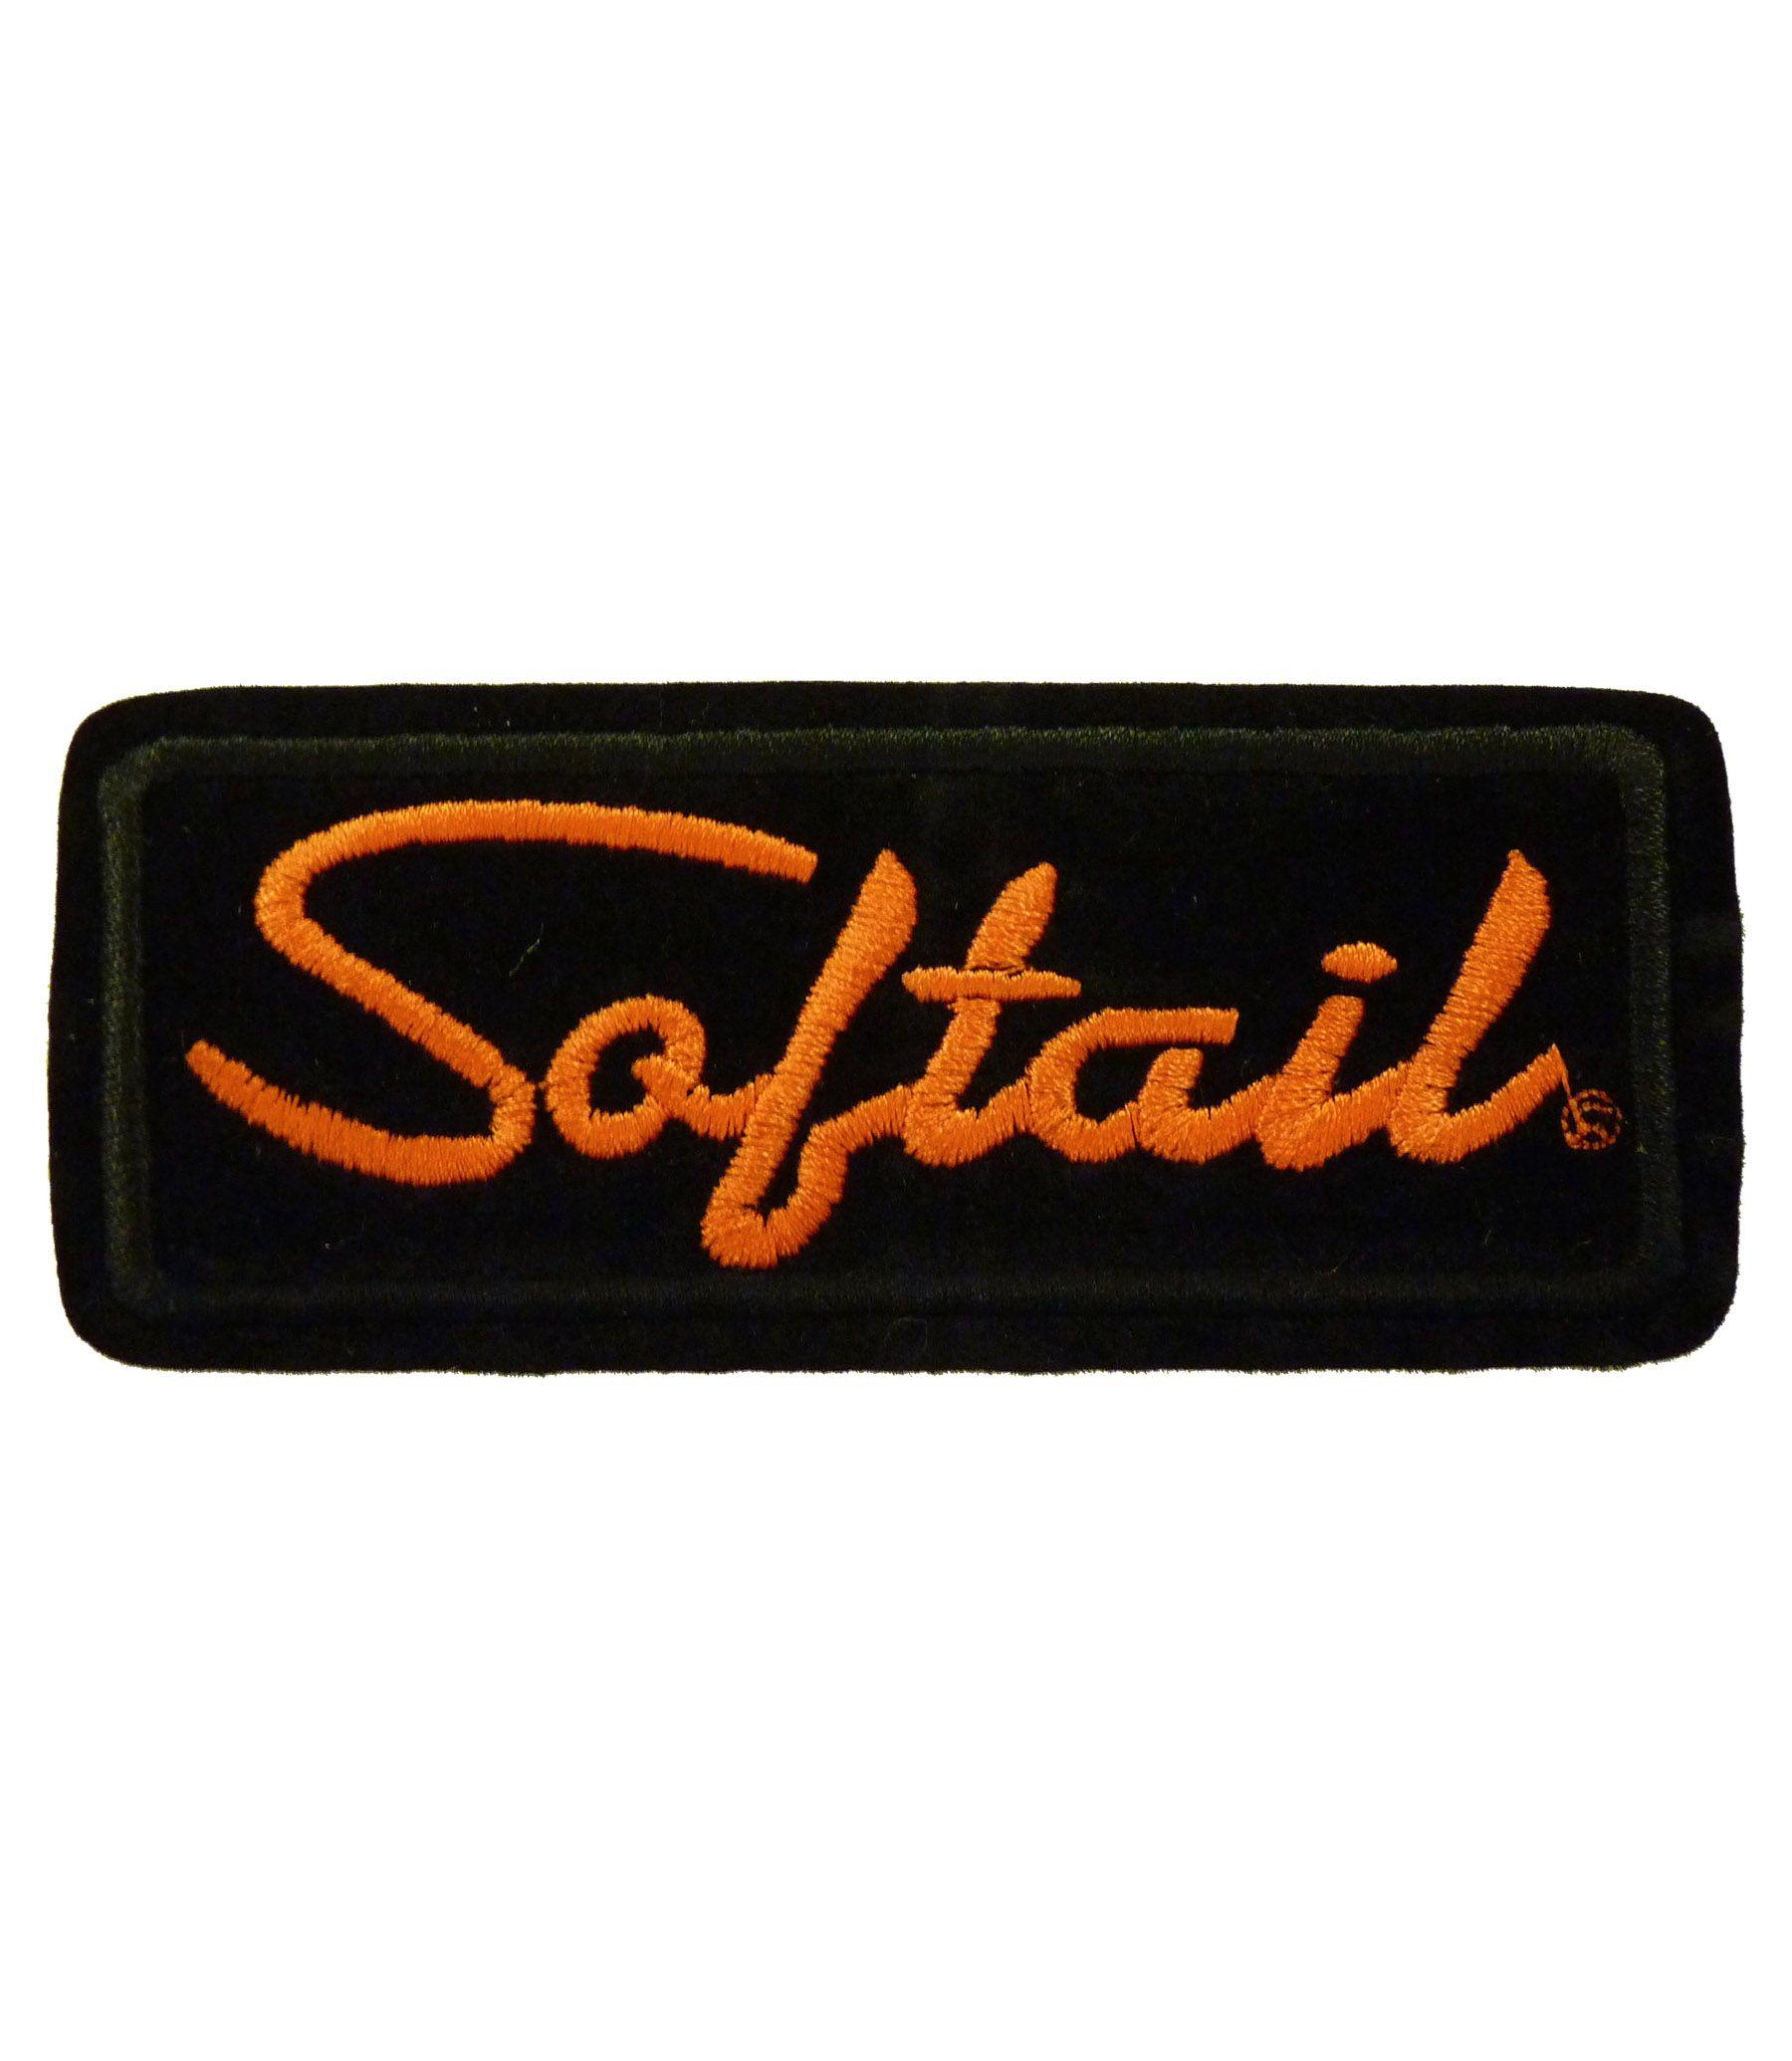 Softail Logo - Harley Davidson Softail Motorcycle Patch, Harley Patches